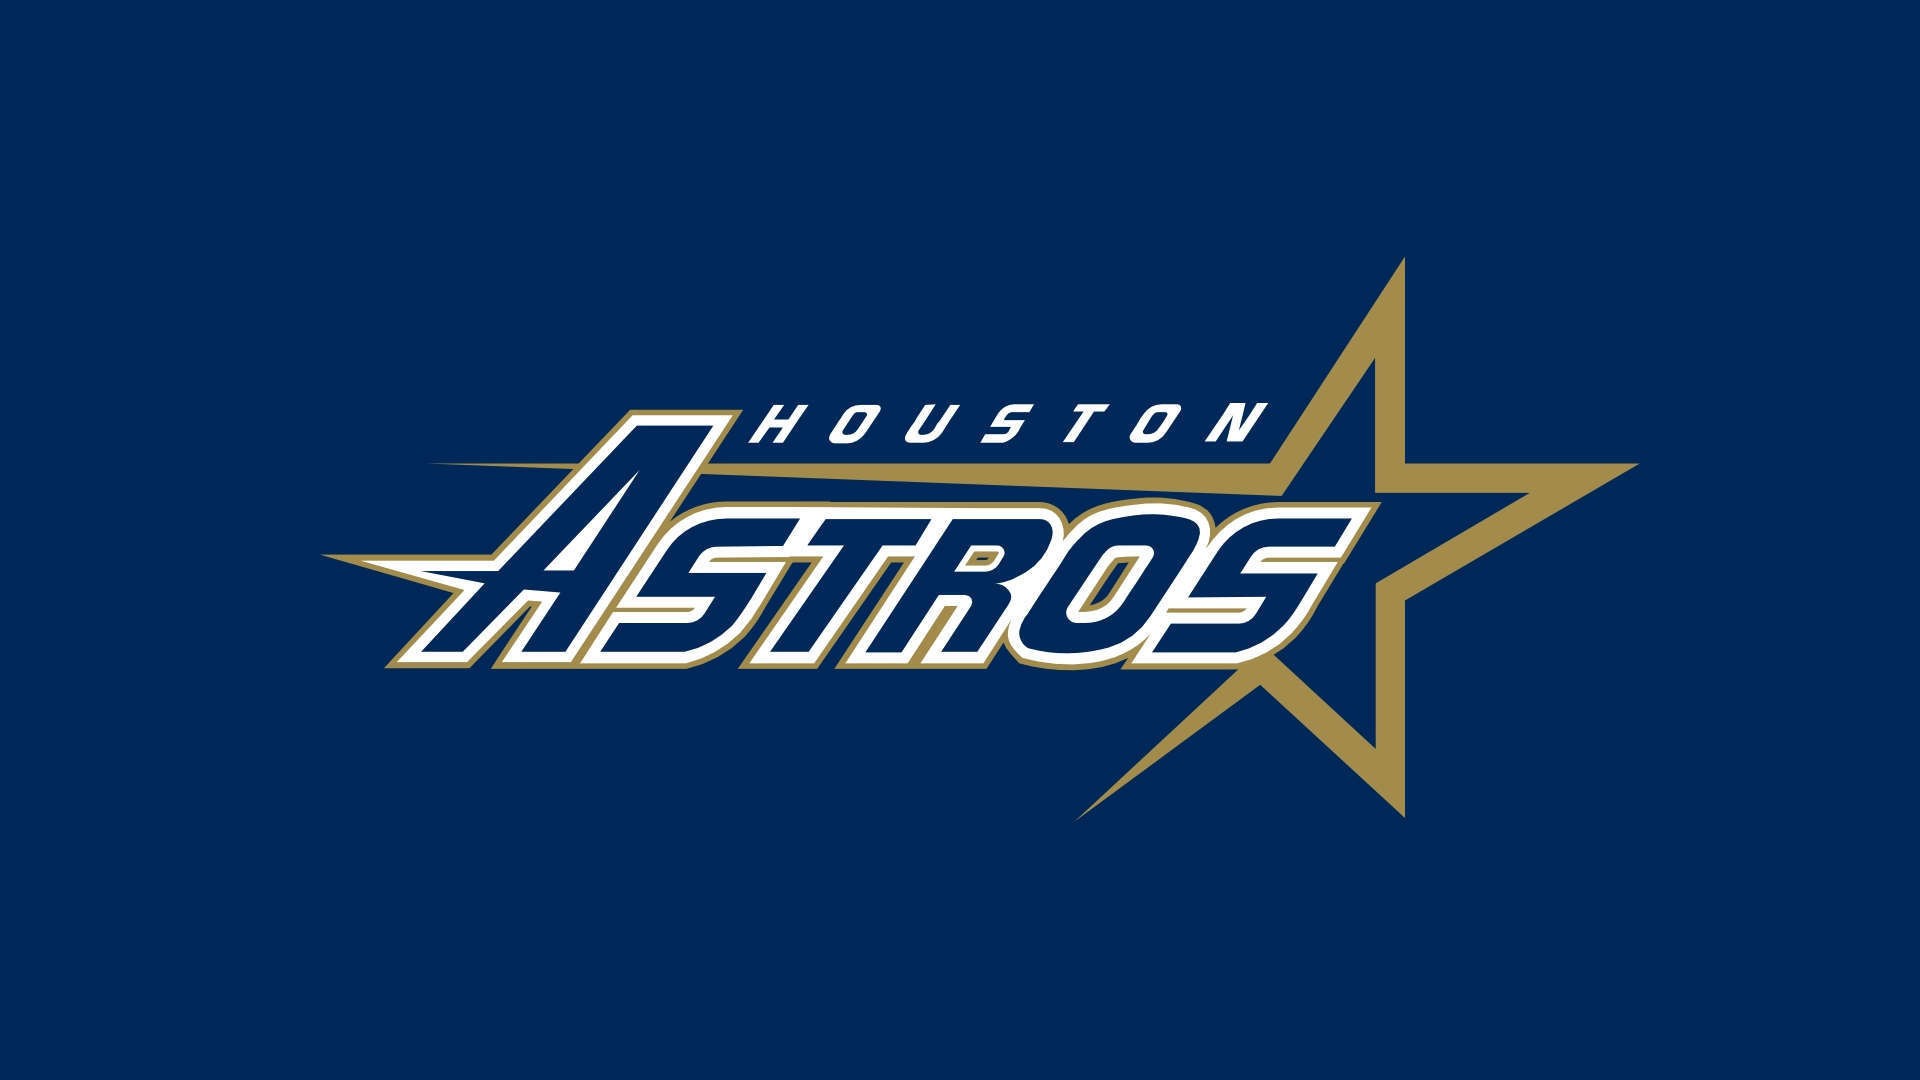 Houston Astros Logo Laptop Wallpaper With high-resolution 1920X1080 pixel. You can use this wallpaper for Mac Desktop Wallpaper, Laptop Screensavers, Android Wallpapers, Tablet or iPhone Home Screen and another mobile phone device